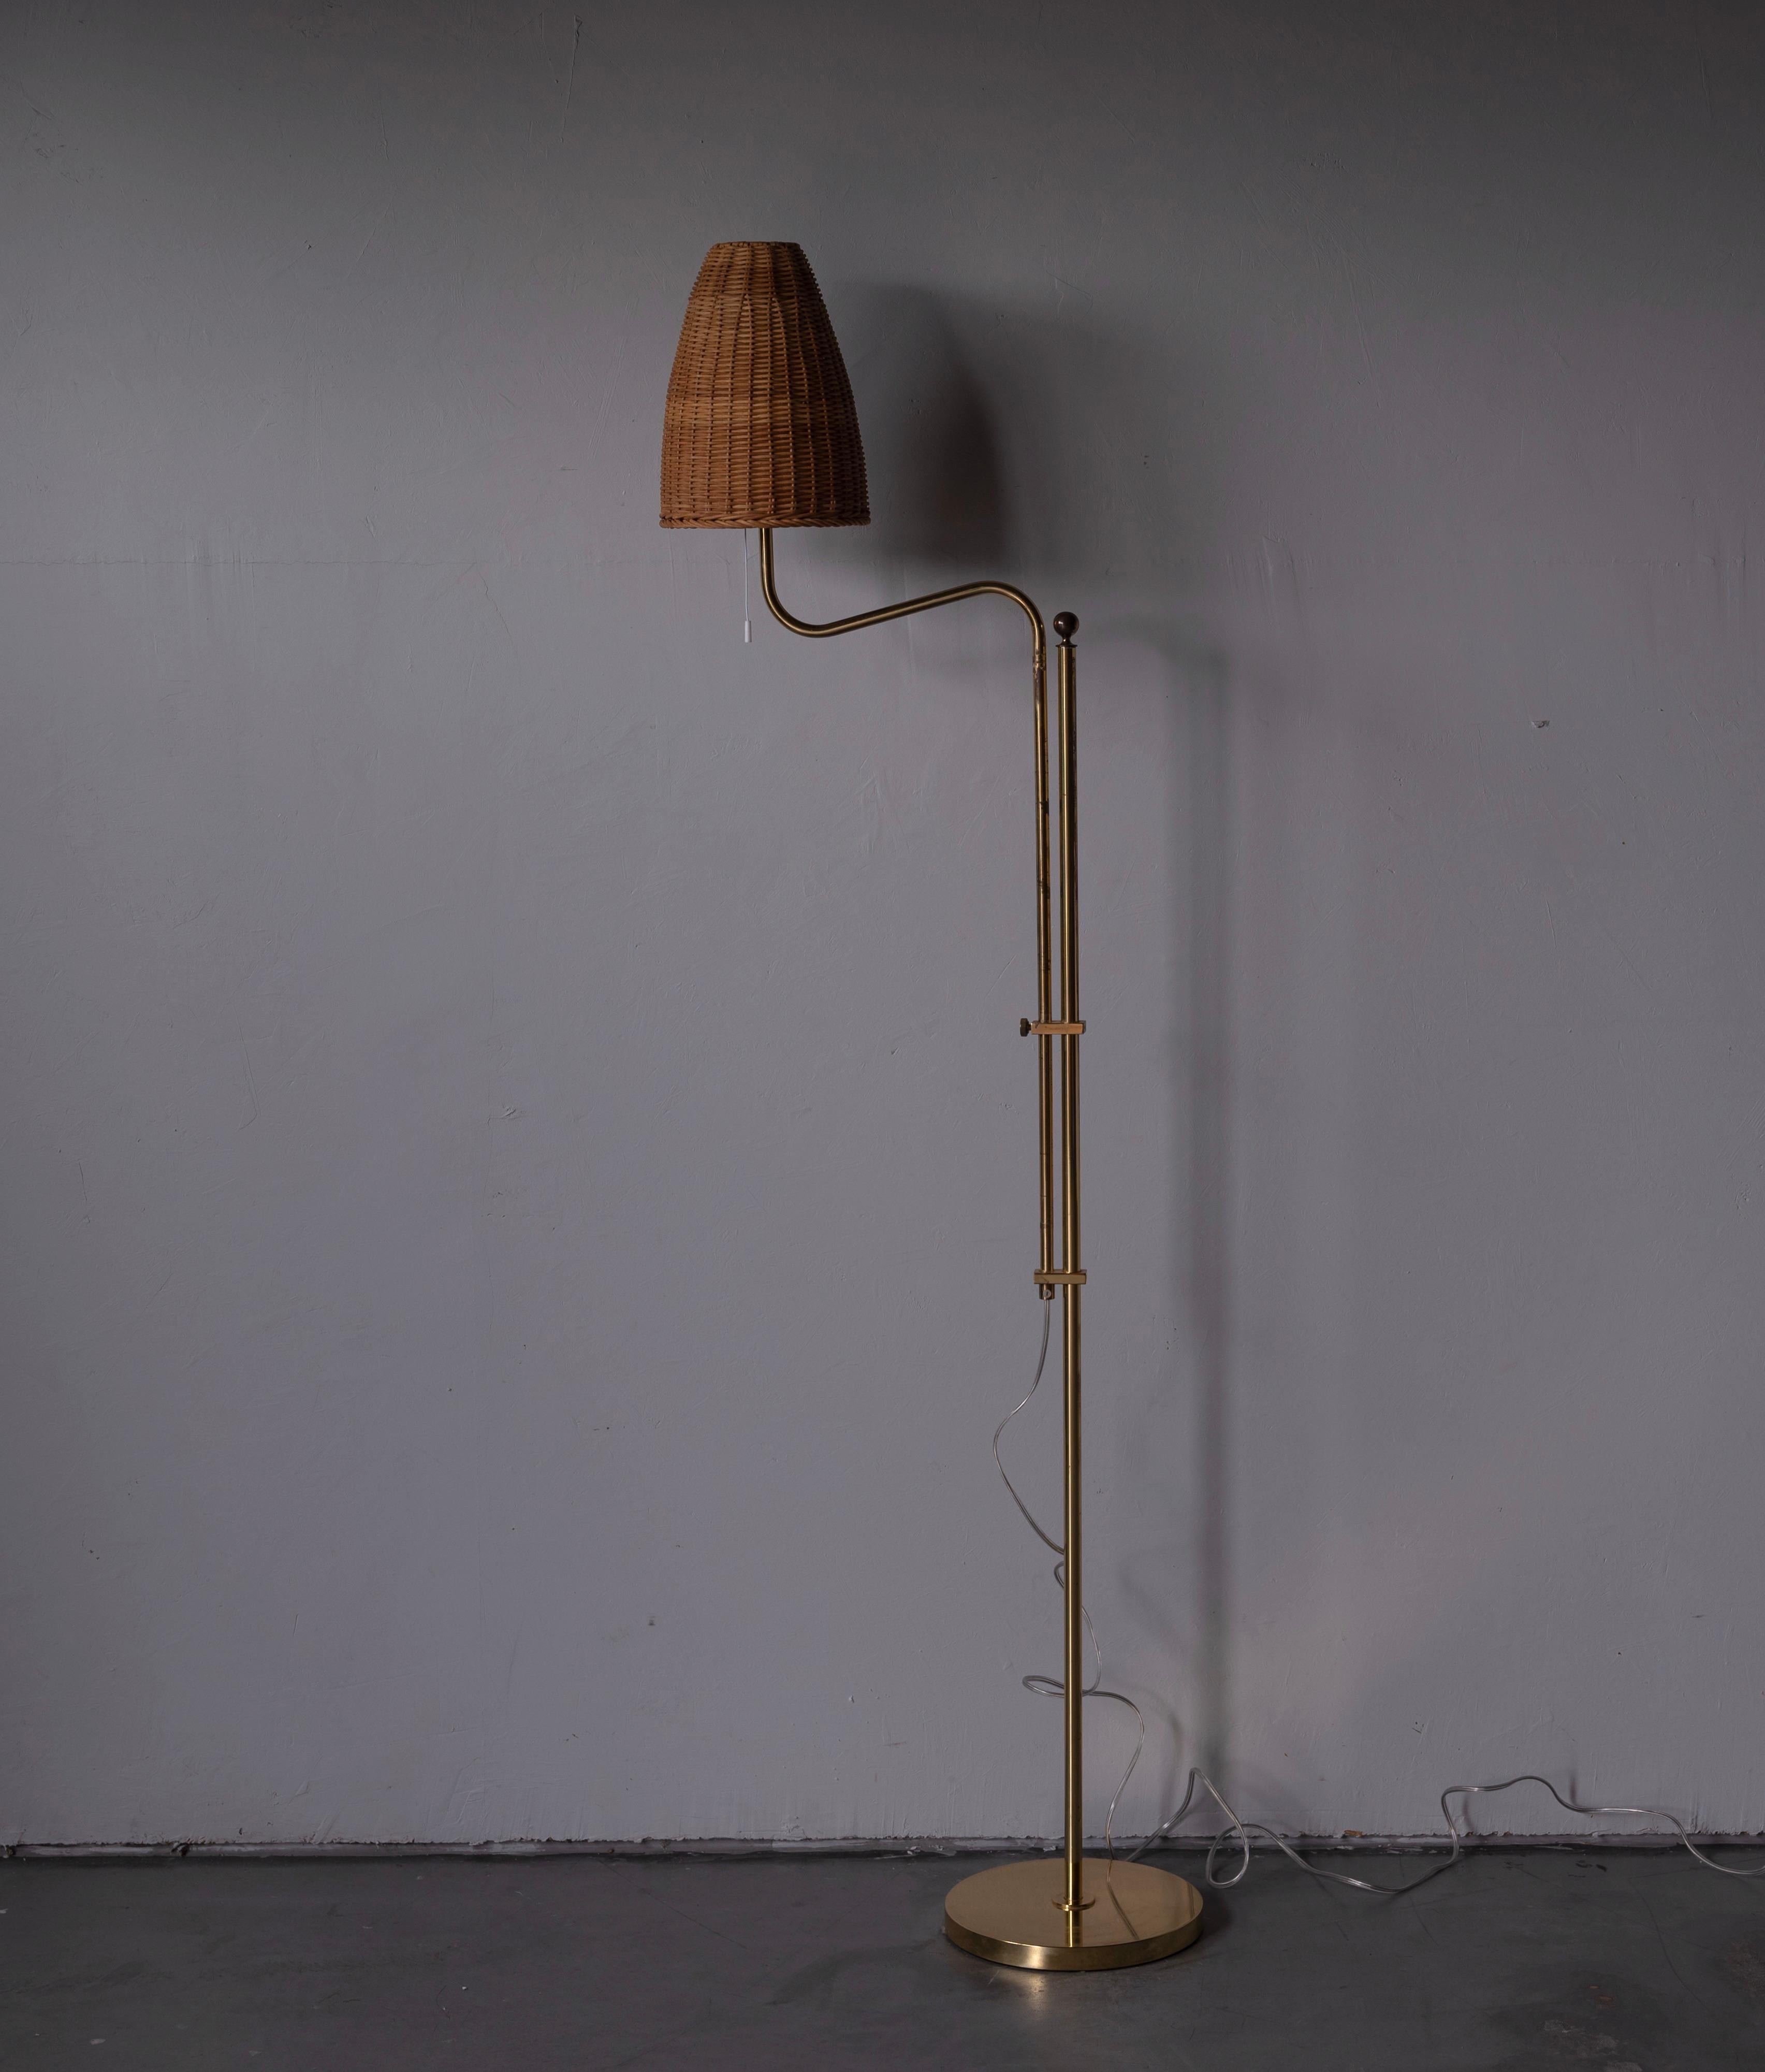 A floor lamp. Designed and produced by Bergboms, Sweden, c. 1970s. Assorted vintage rattan lampshade.

Other designers of the period include Paavo Tynell, Hans Bergström, Josef Frank, and Kaare Klint.